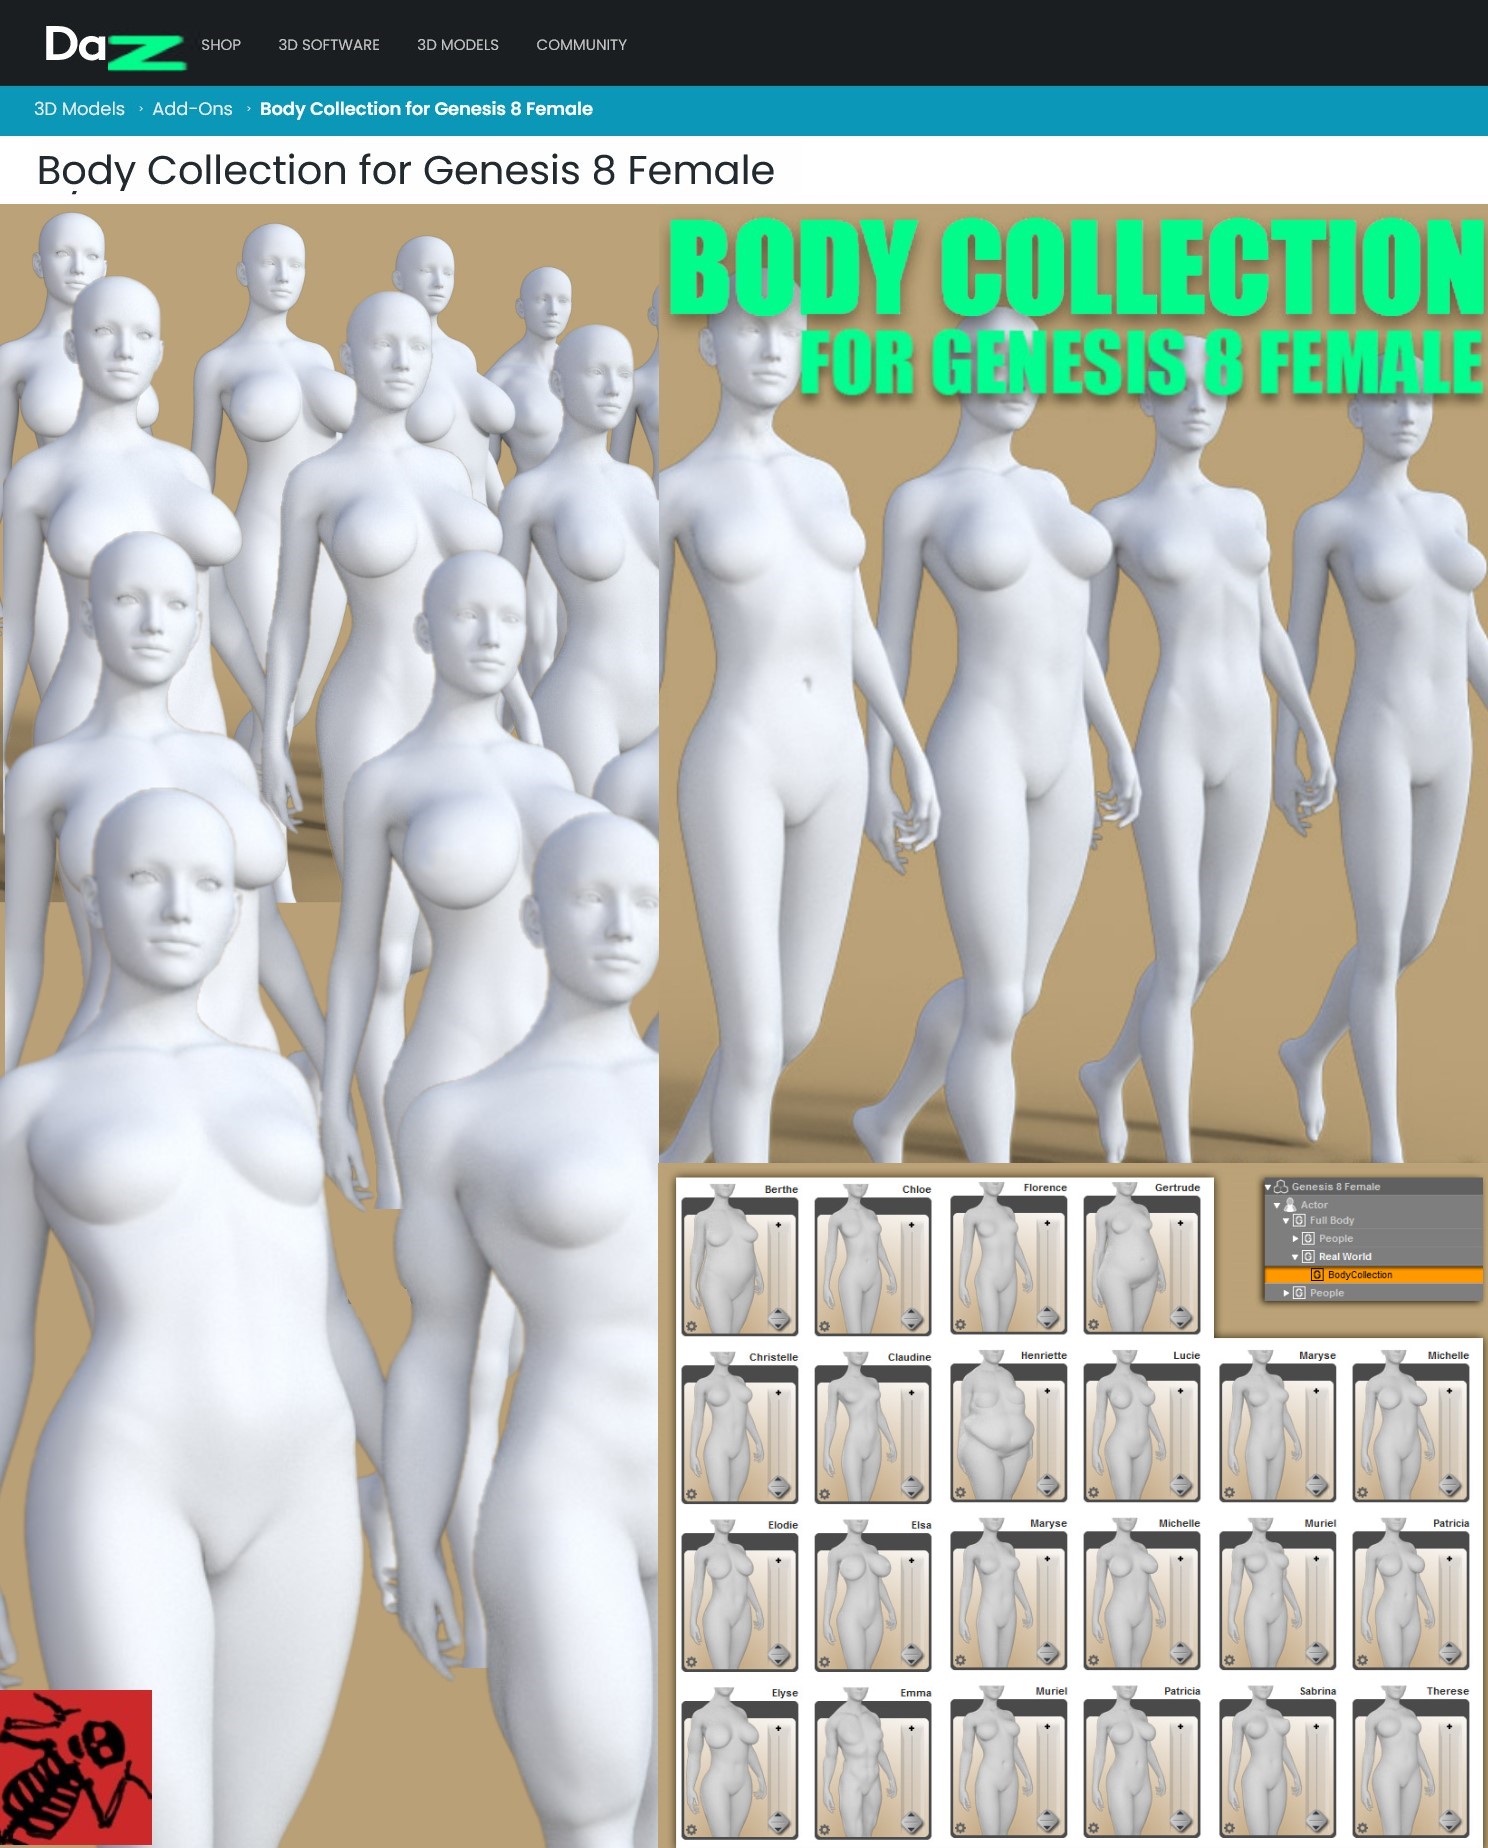 Body Collection for Genesis 8 Femalee6f5d43cdbb55e36